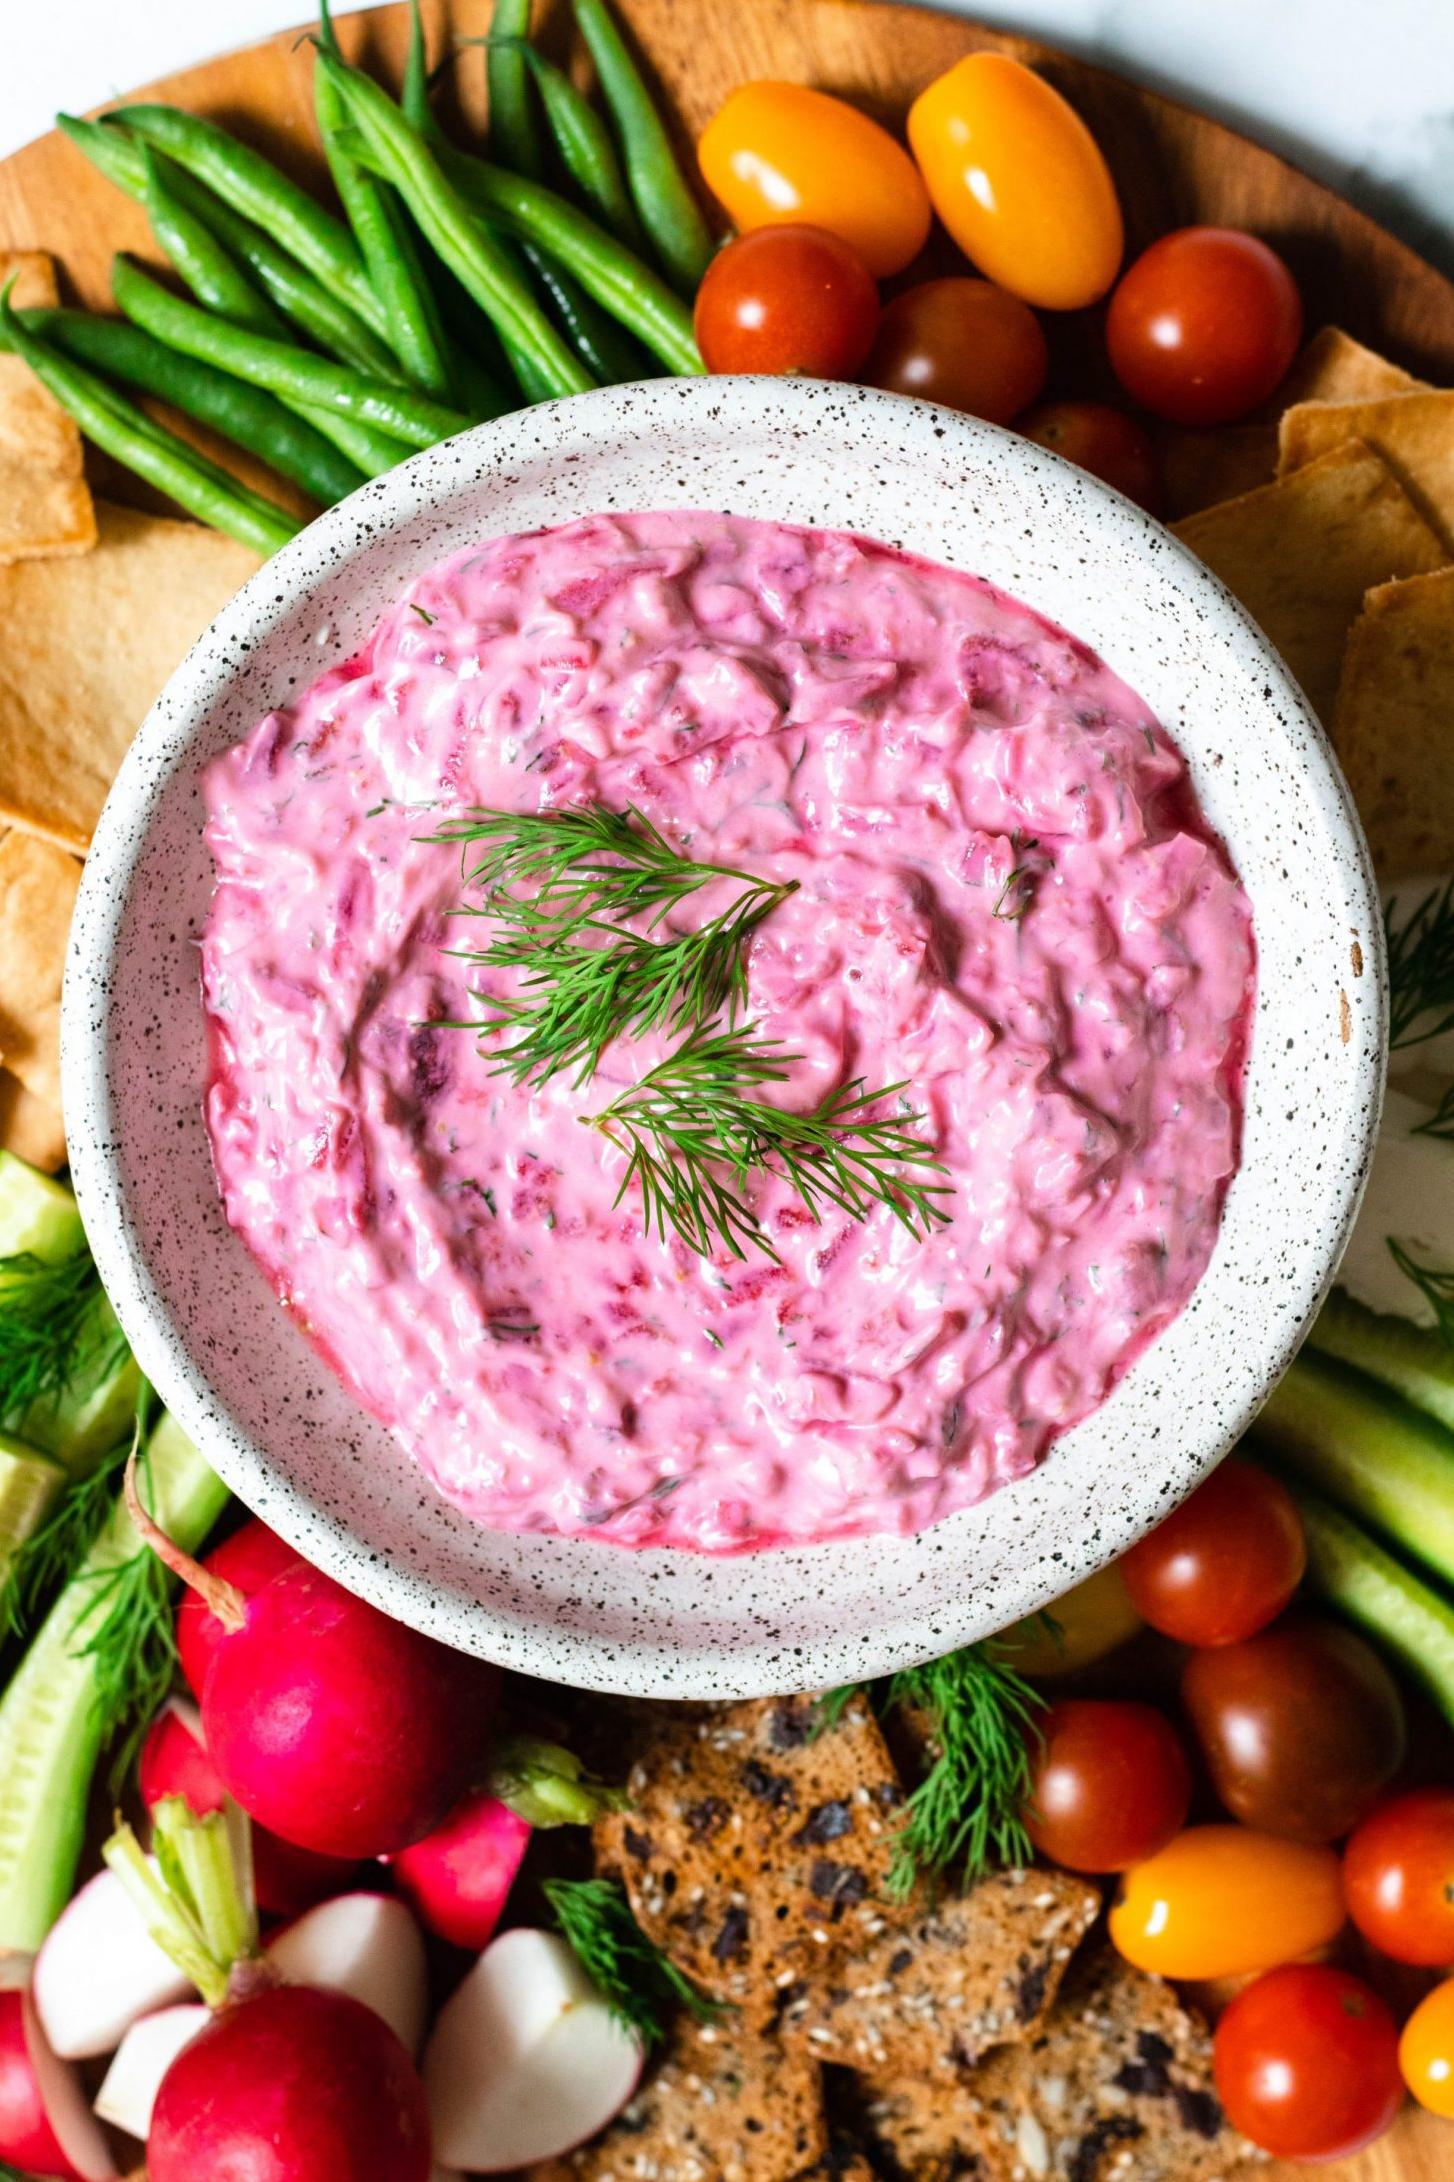  Bright and tangy- our beet tzatziki is a flavorful twist on a classic dip.